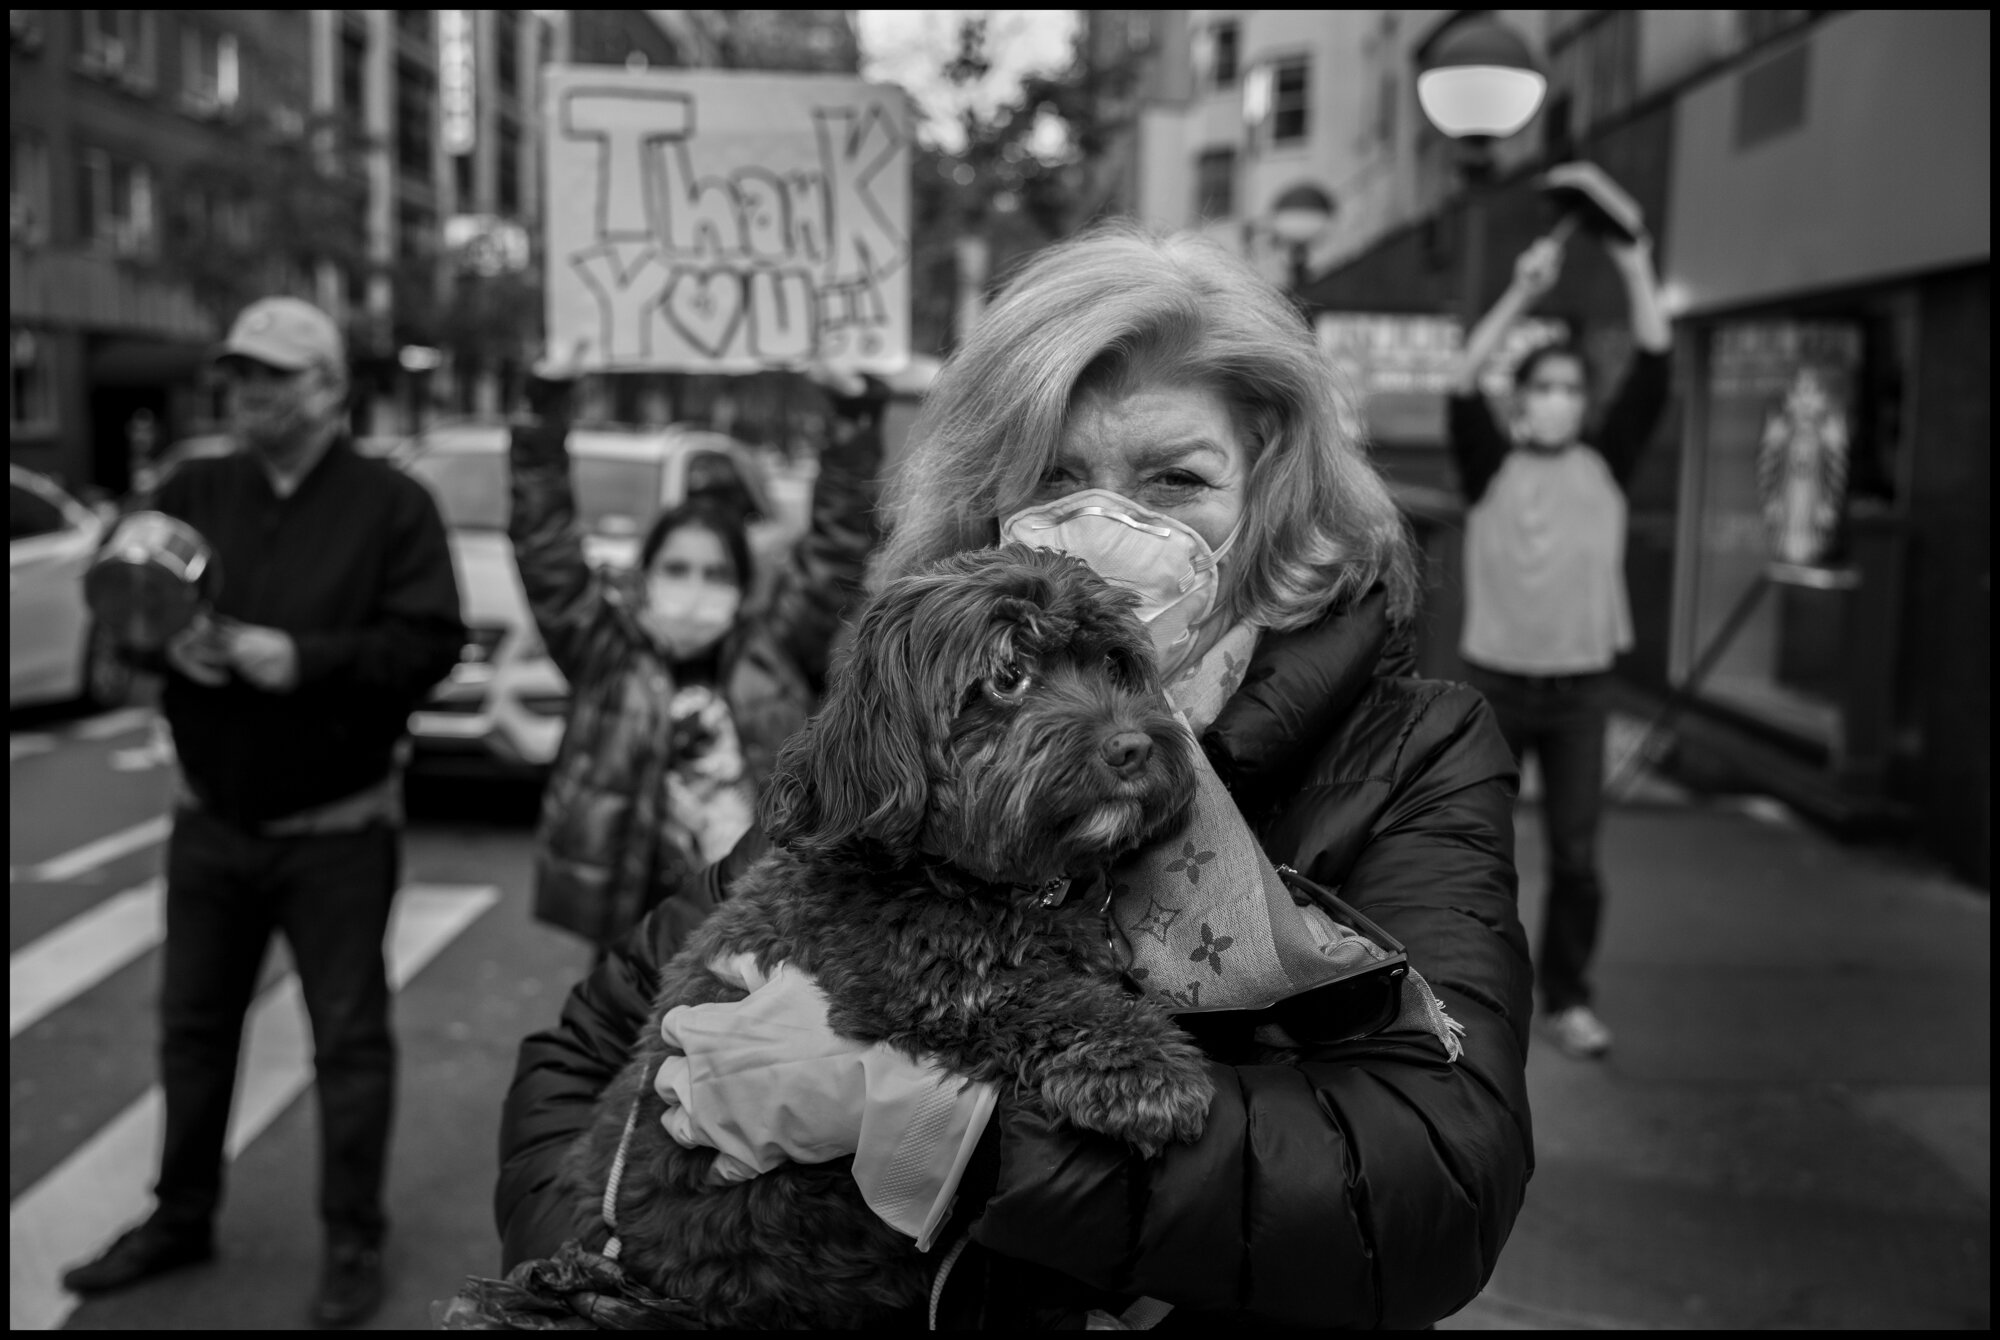  A resident of the Upper Eastside in New York City cheers on the healthcare and essential workers, in front of Lenox Hill Hospital.  May 9, 2020. © Peter Turnley.   ID# 42-008 